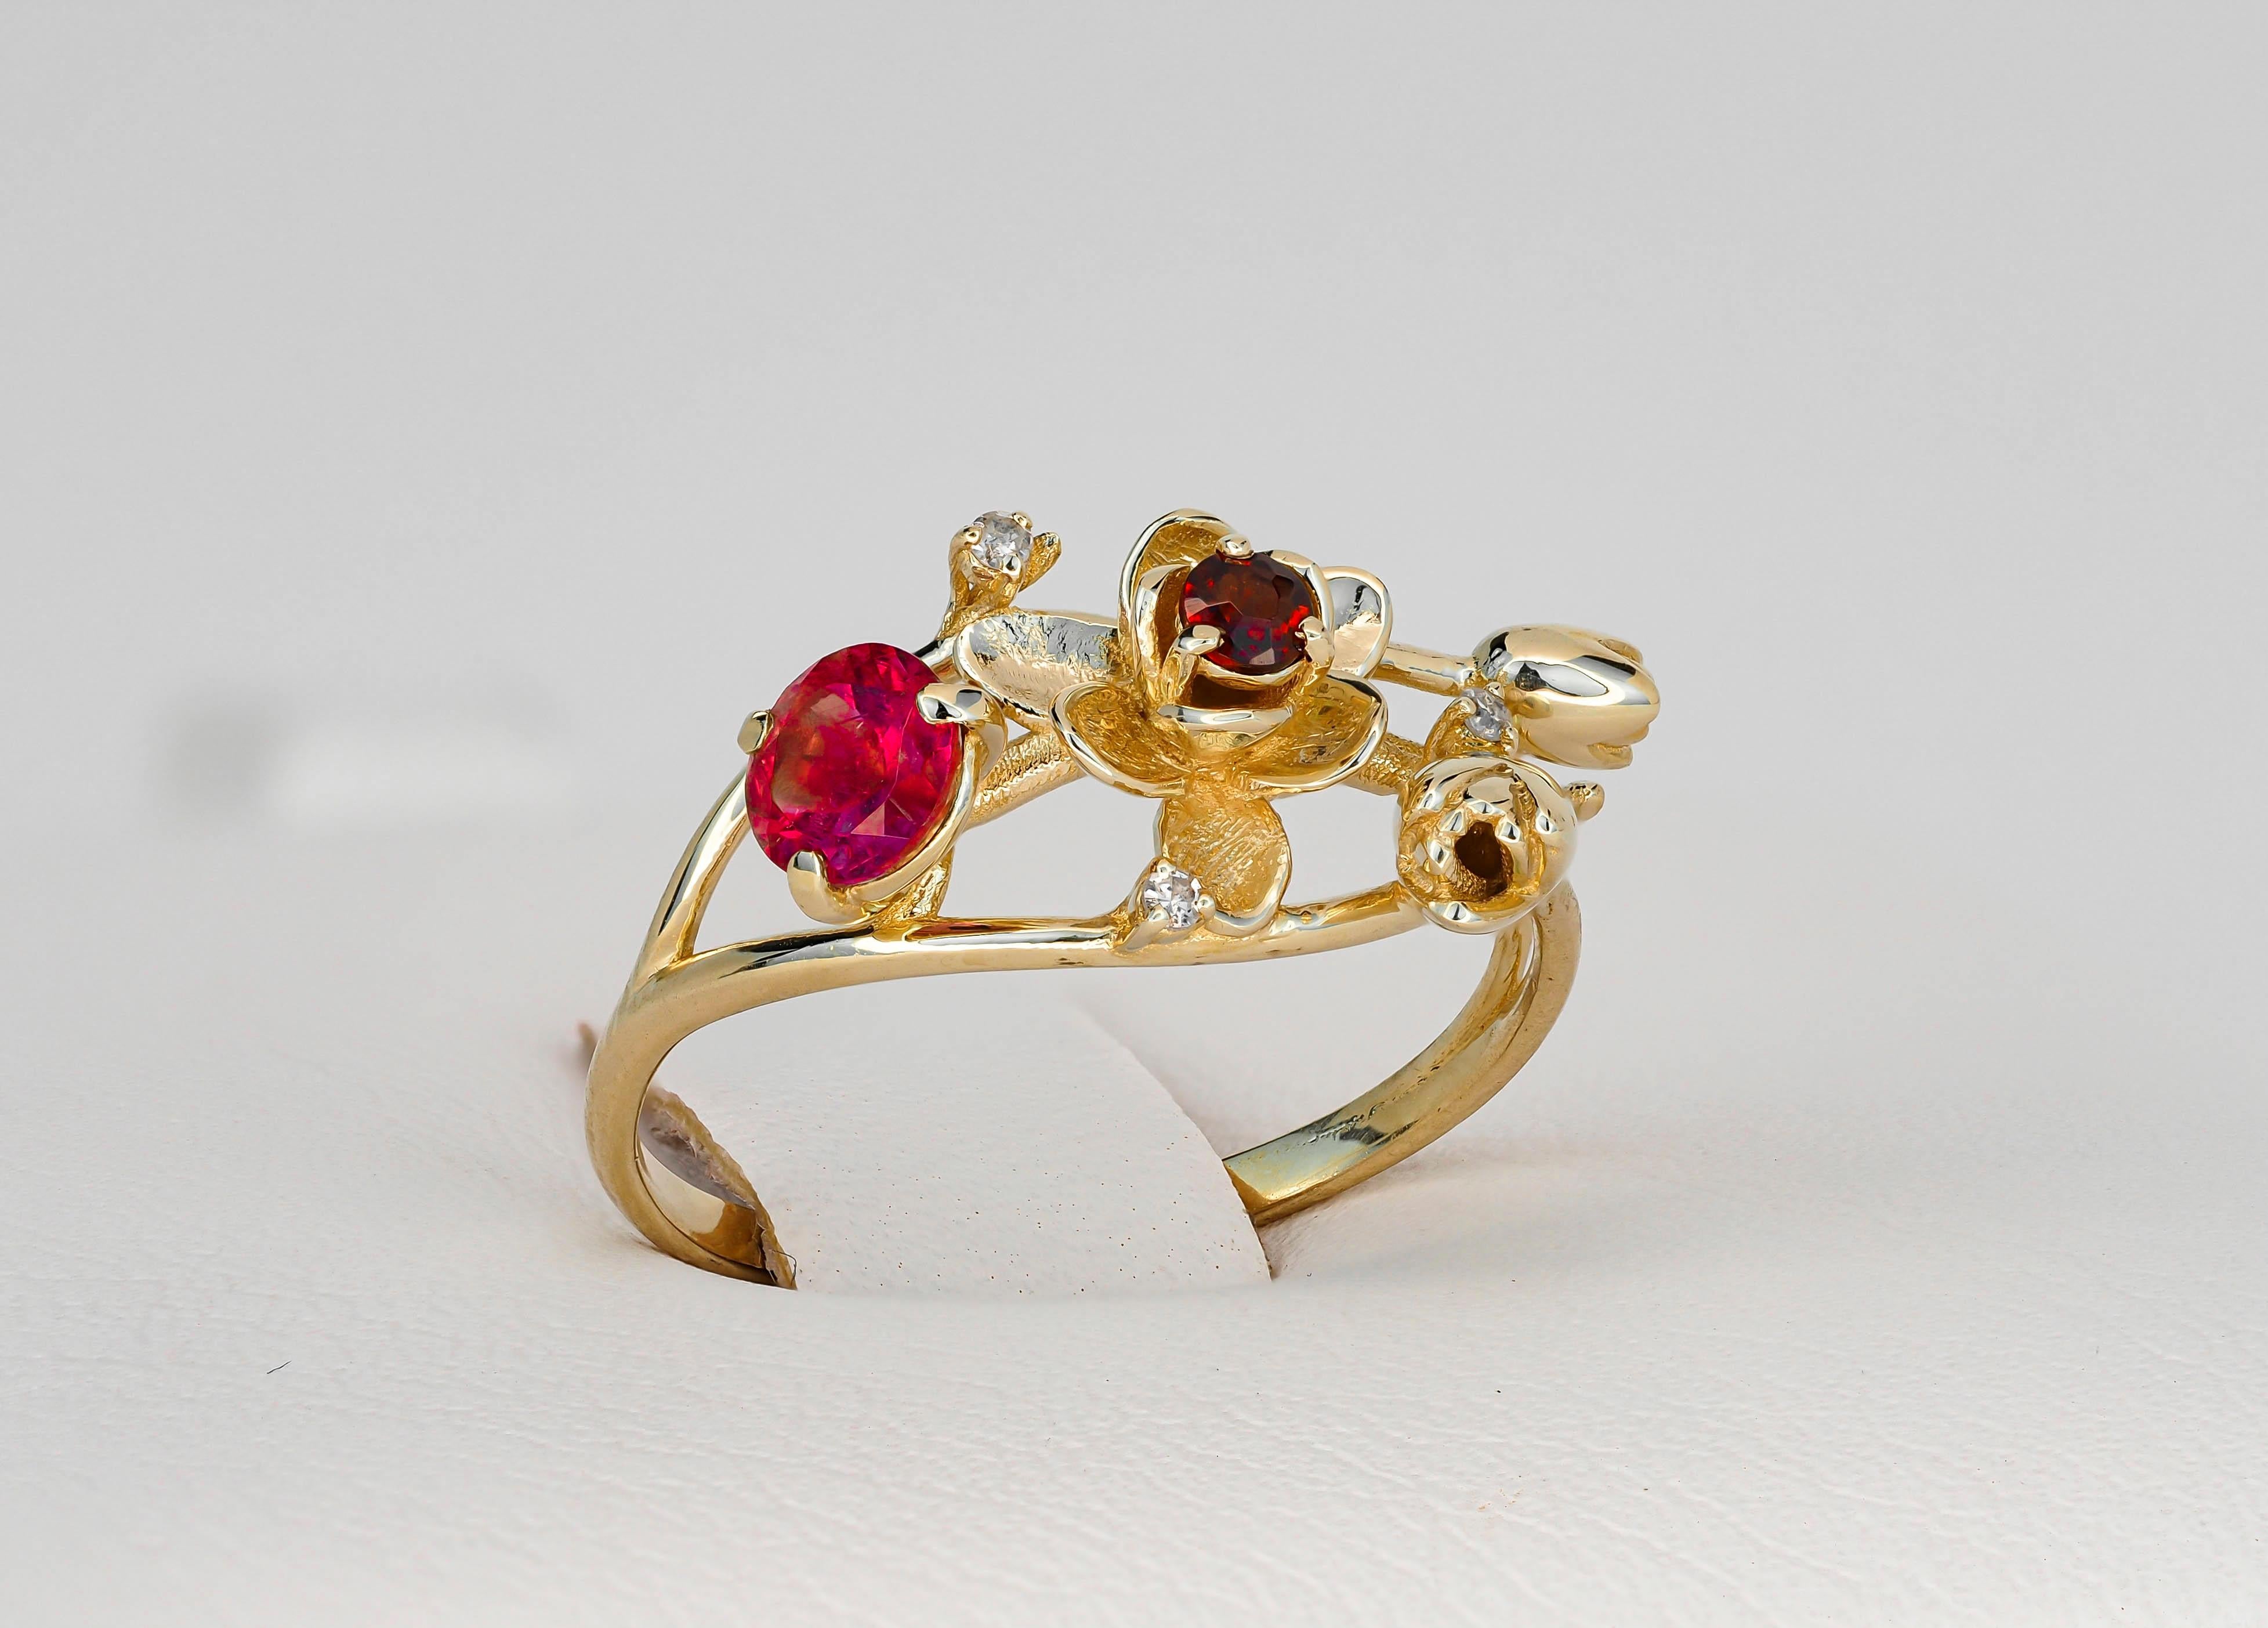 For Sale:  Ruby ring. 14k Gold Ring with Ruby, Garnet and Diamonds. Orchid Flower Ring. 5